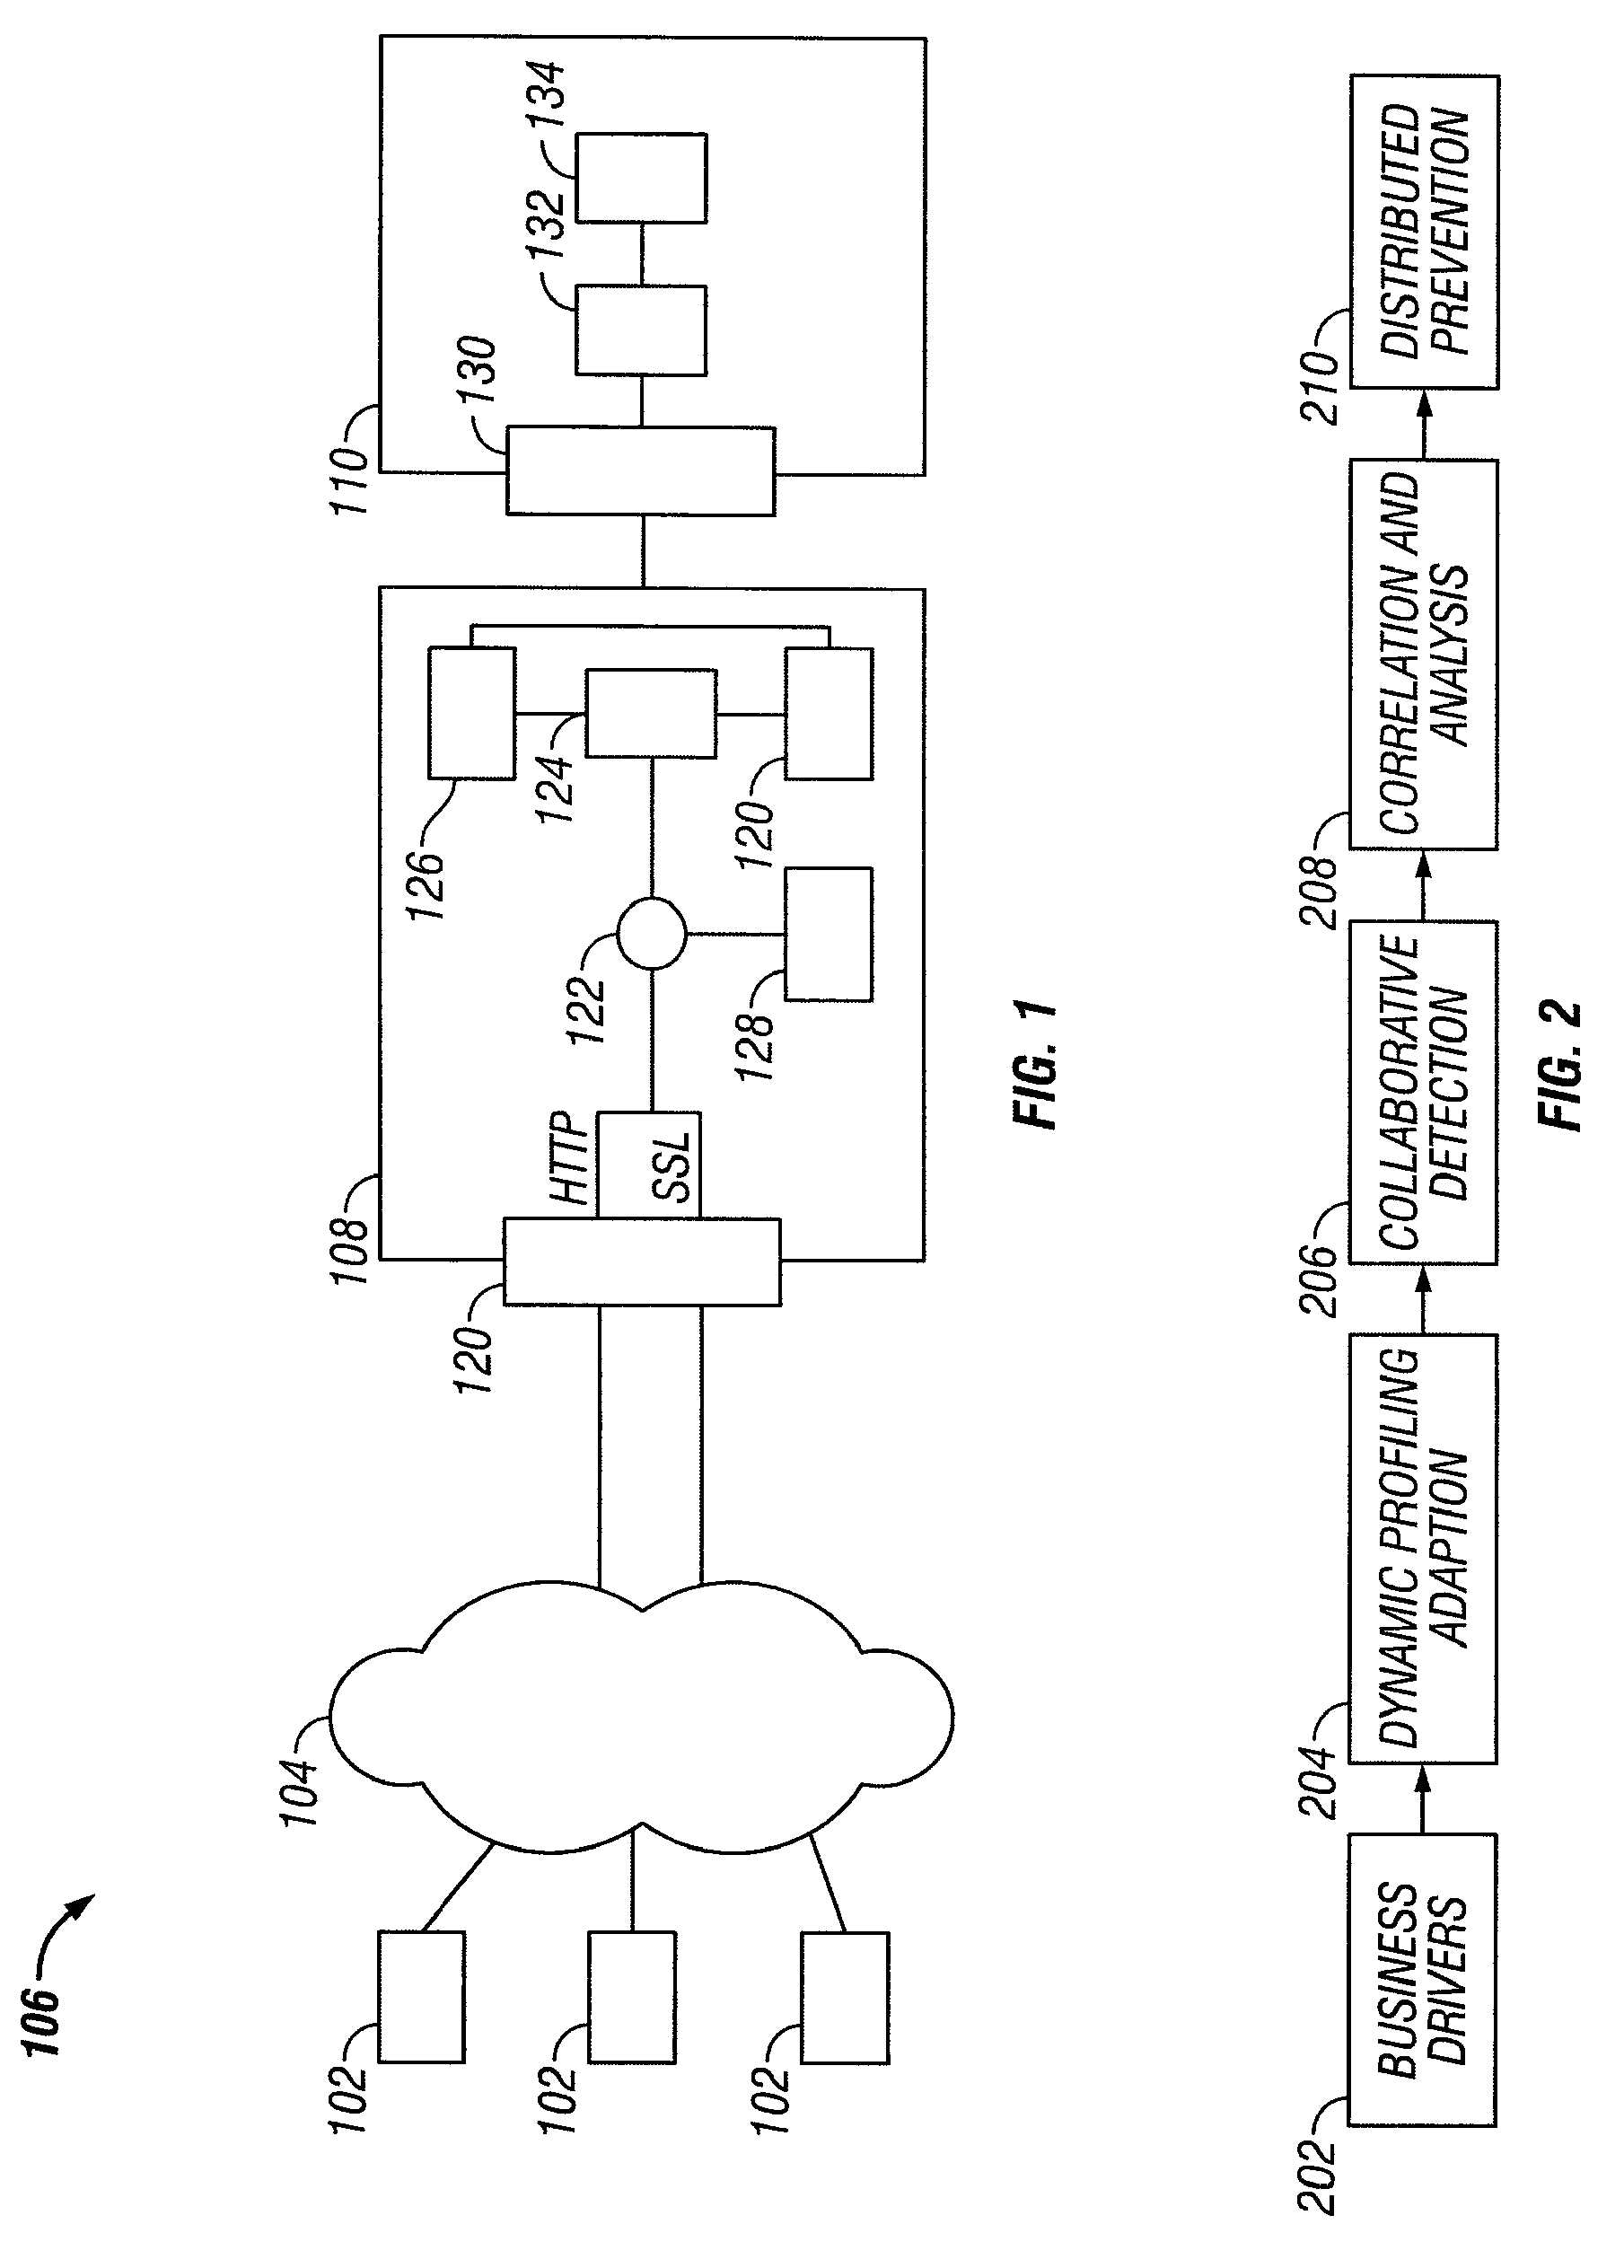 System and method of securing web applications across an enterprise